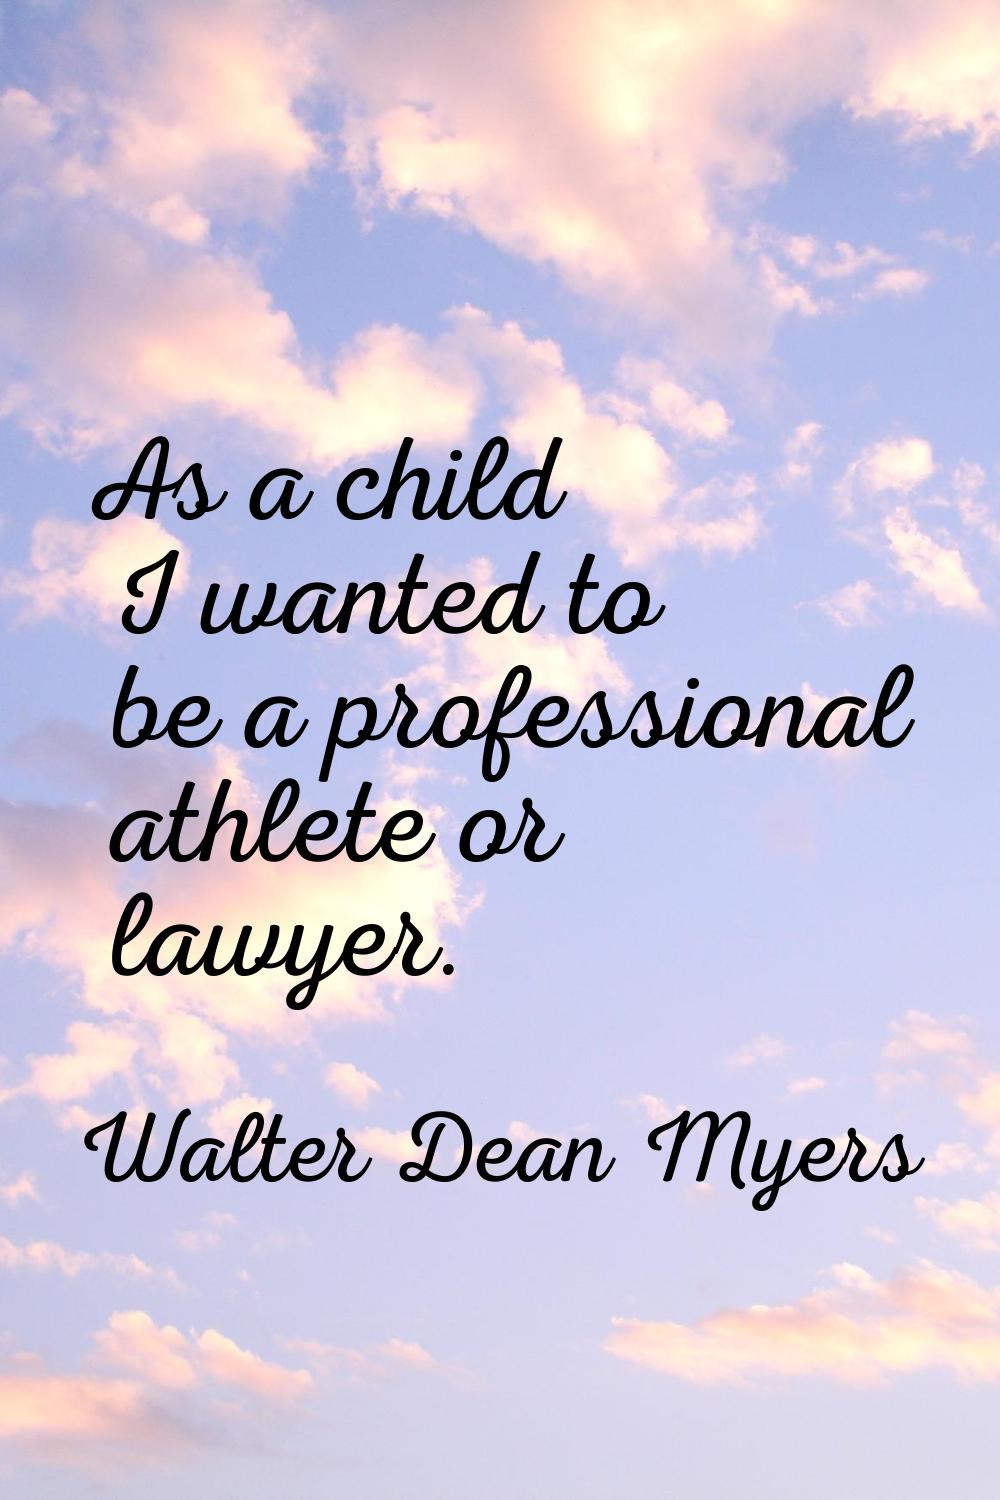 As a child I wanted to be a professional athlete or lawyer.